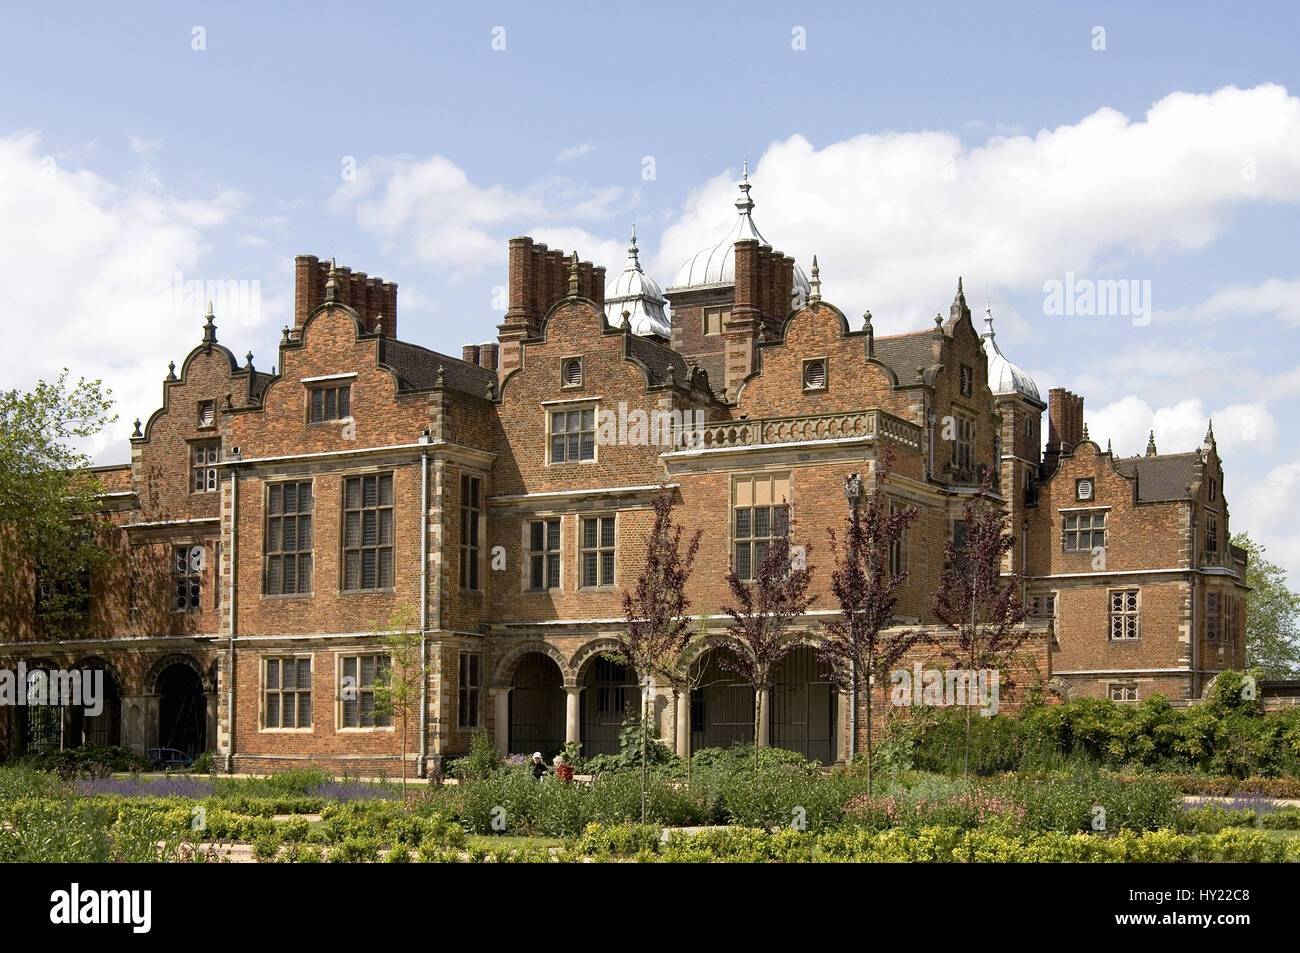 Aston Hall in Birmingham is a Jacobean-style mansion in Aston, Birmingham, England. Construction commenced in April 1618 and Sir Thomas Holte moved in Stock Photo